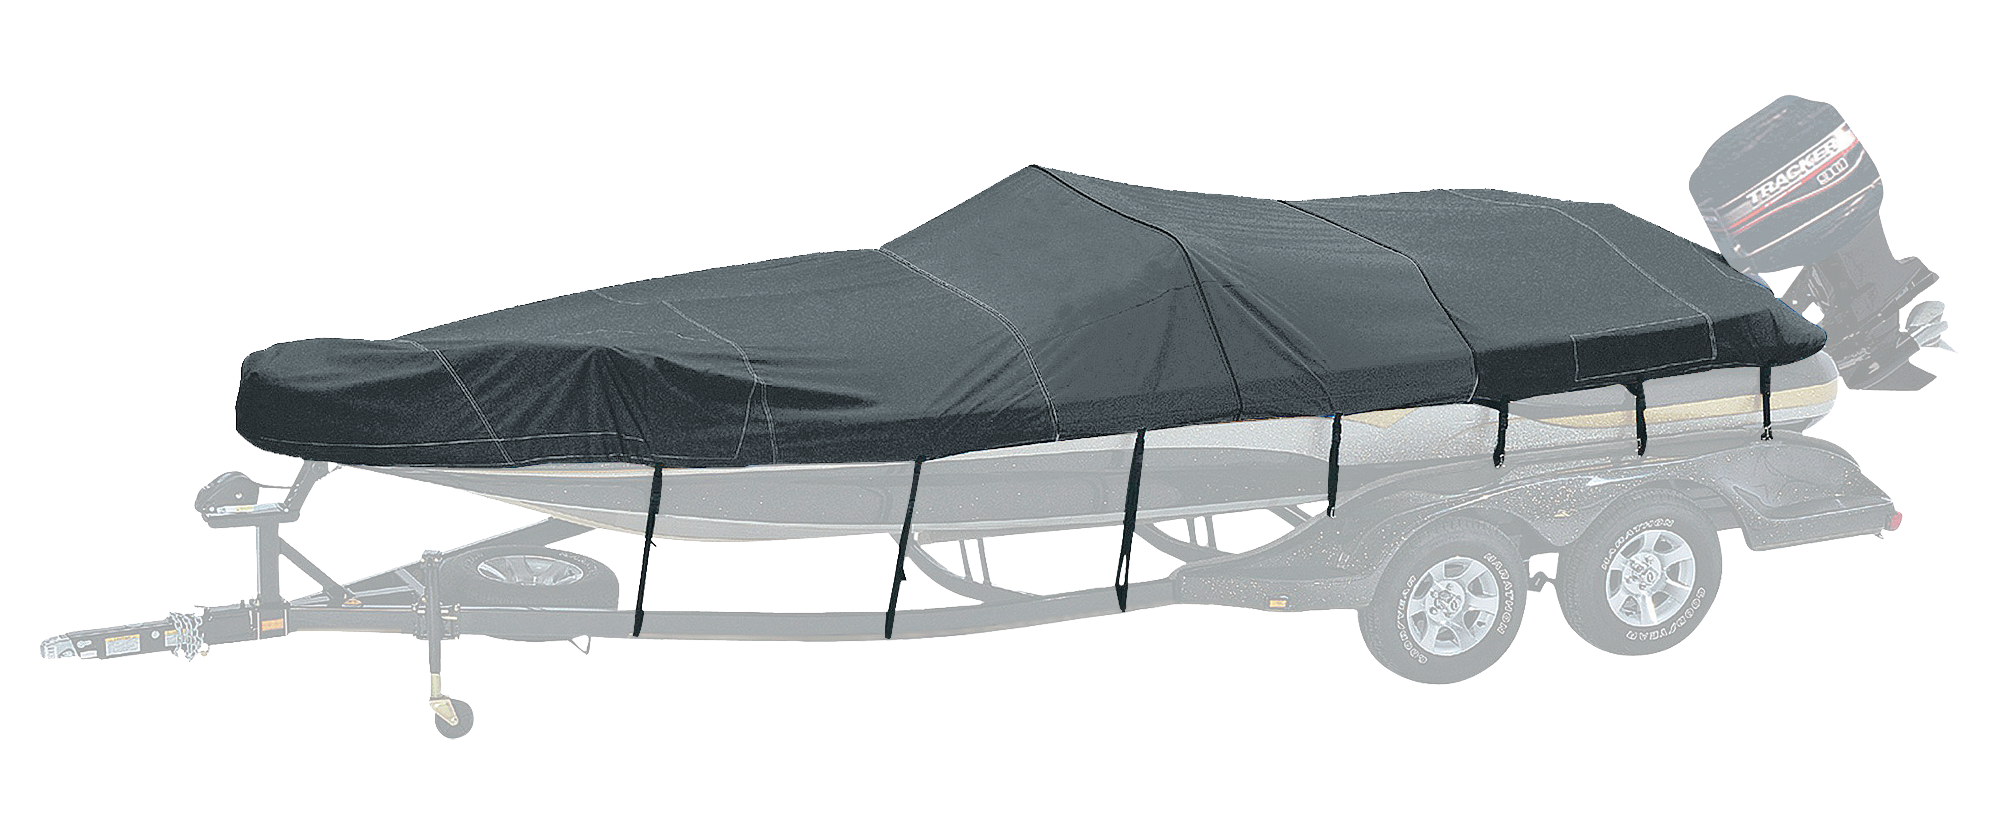 Bass Pro Shops Exact Fit Custom Boat Cover by Westland - Tracker - 2002-2005 Pro Team 185 SC O/B - Charcoal